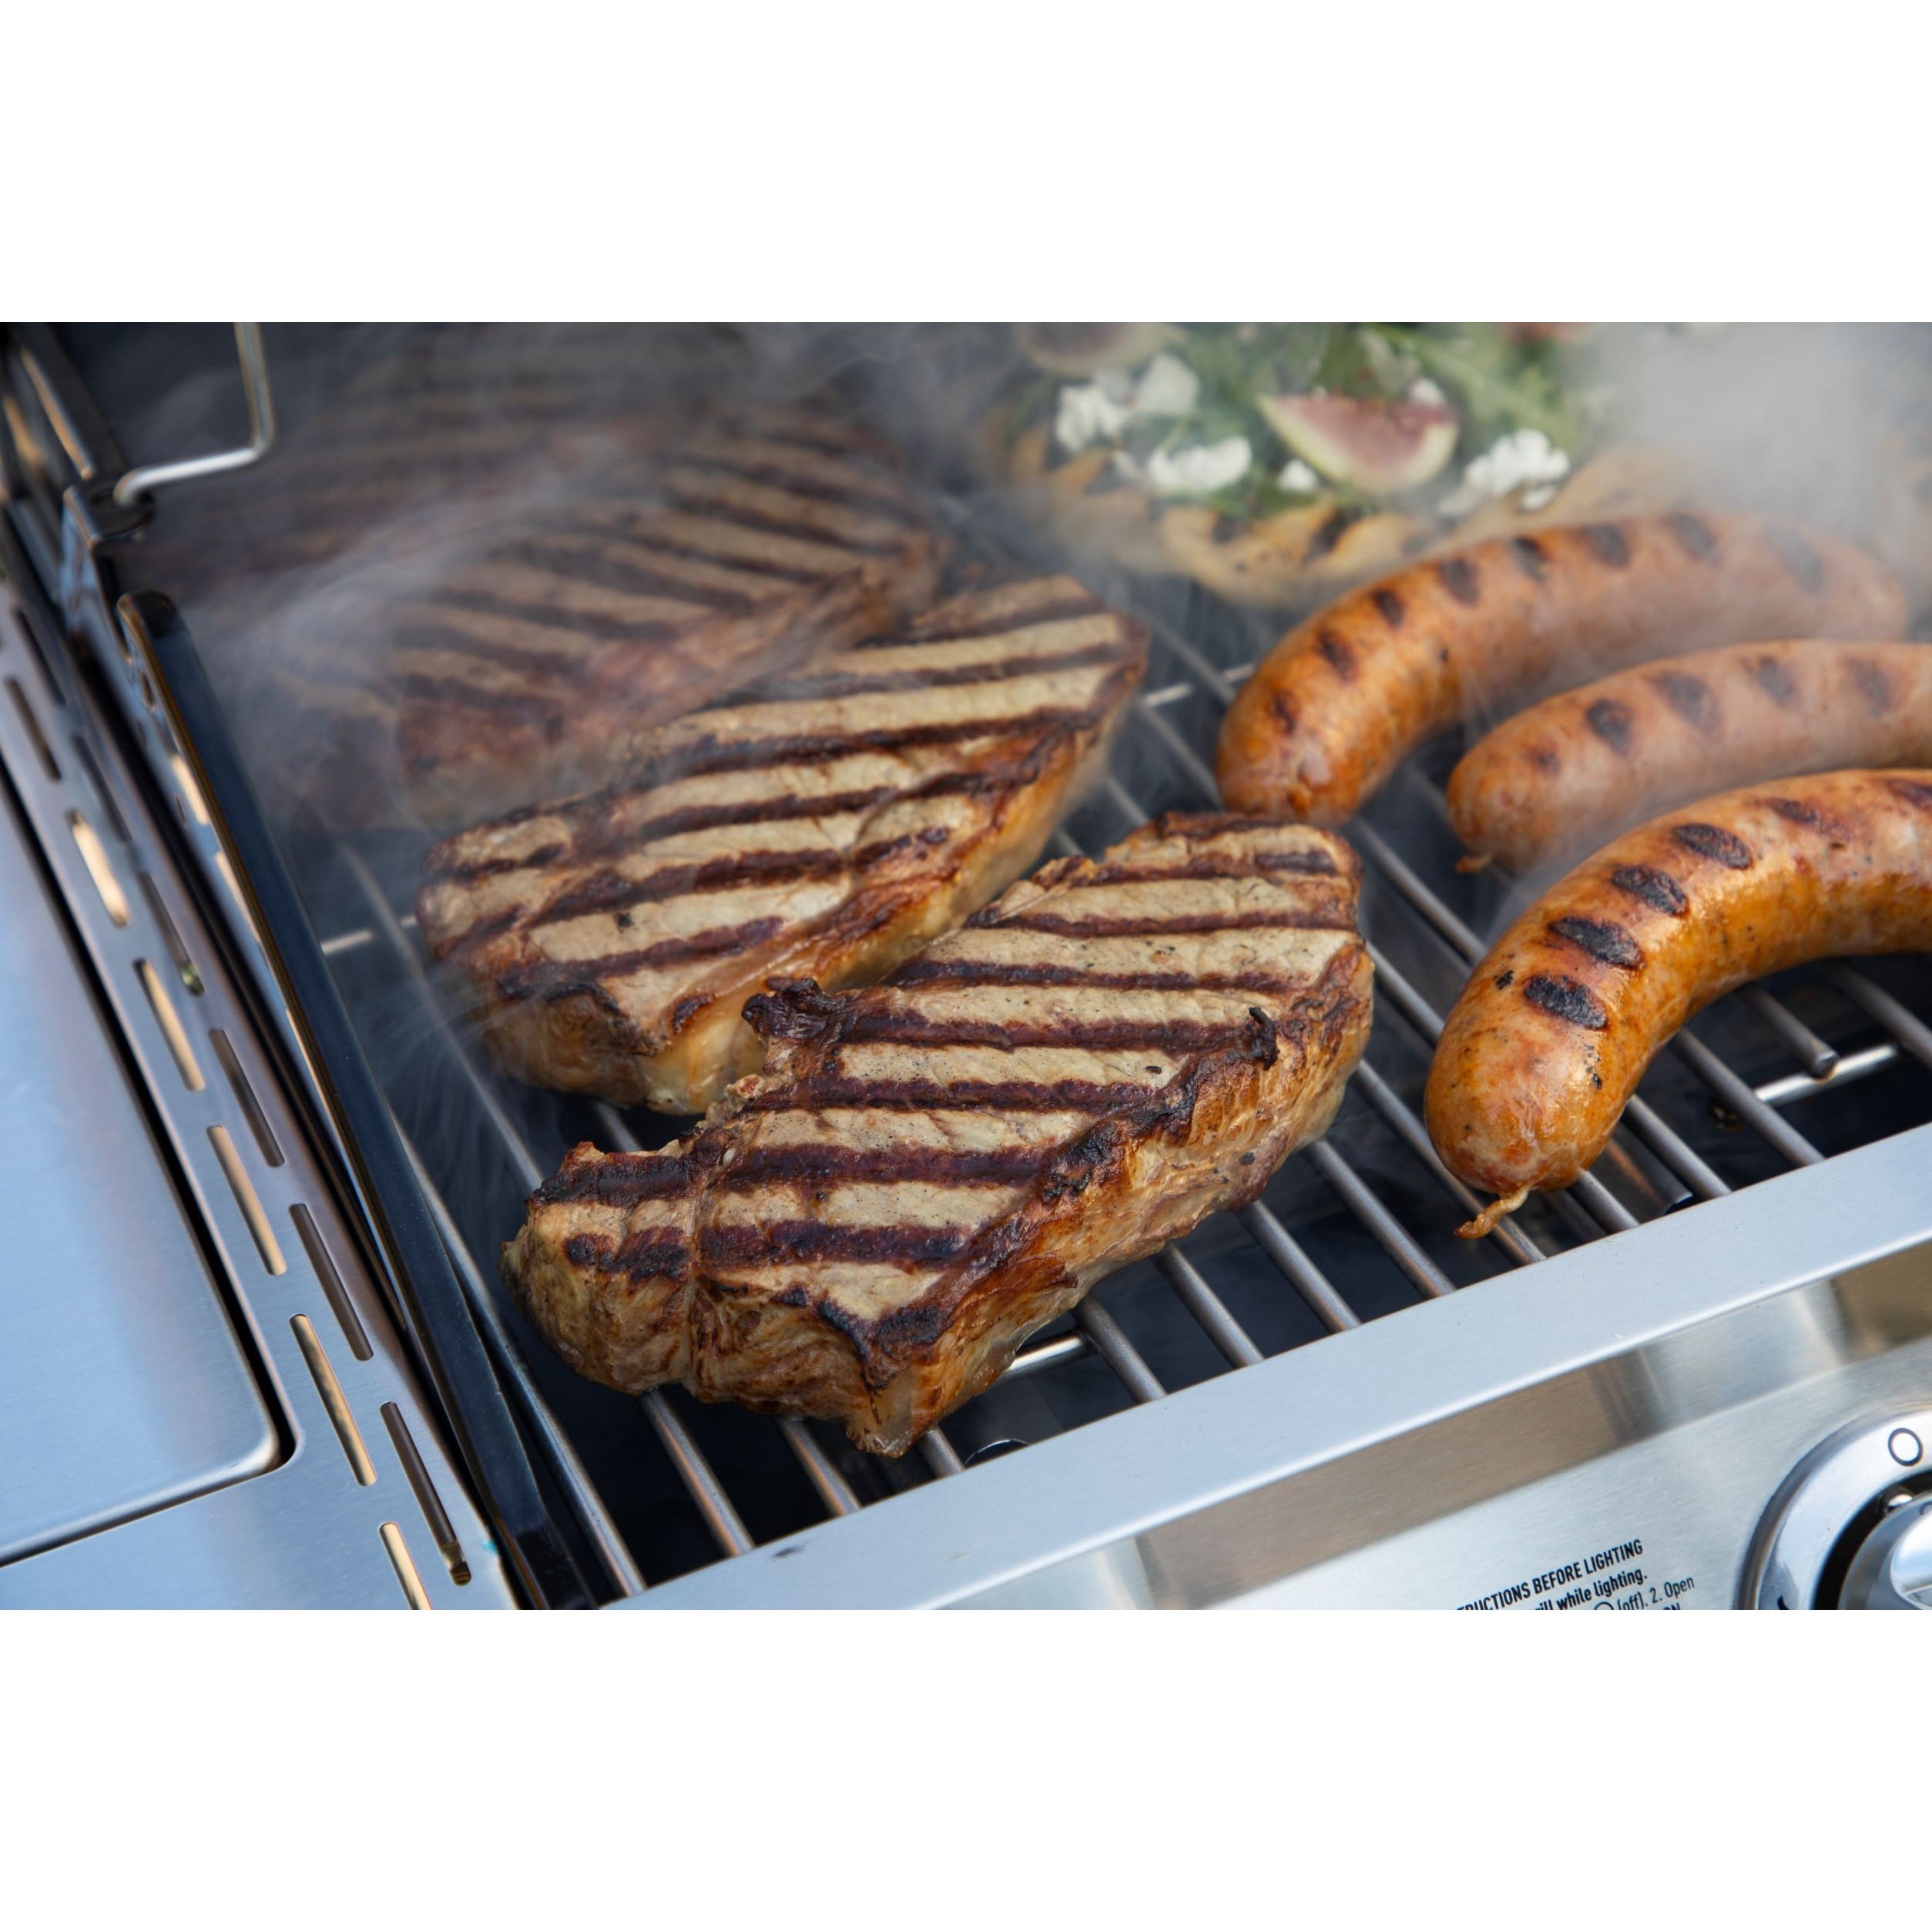 Nexgrill Introduces First Outdoor Smart Gas Grill With Air Fryer